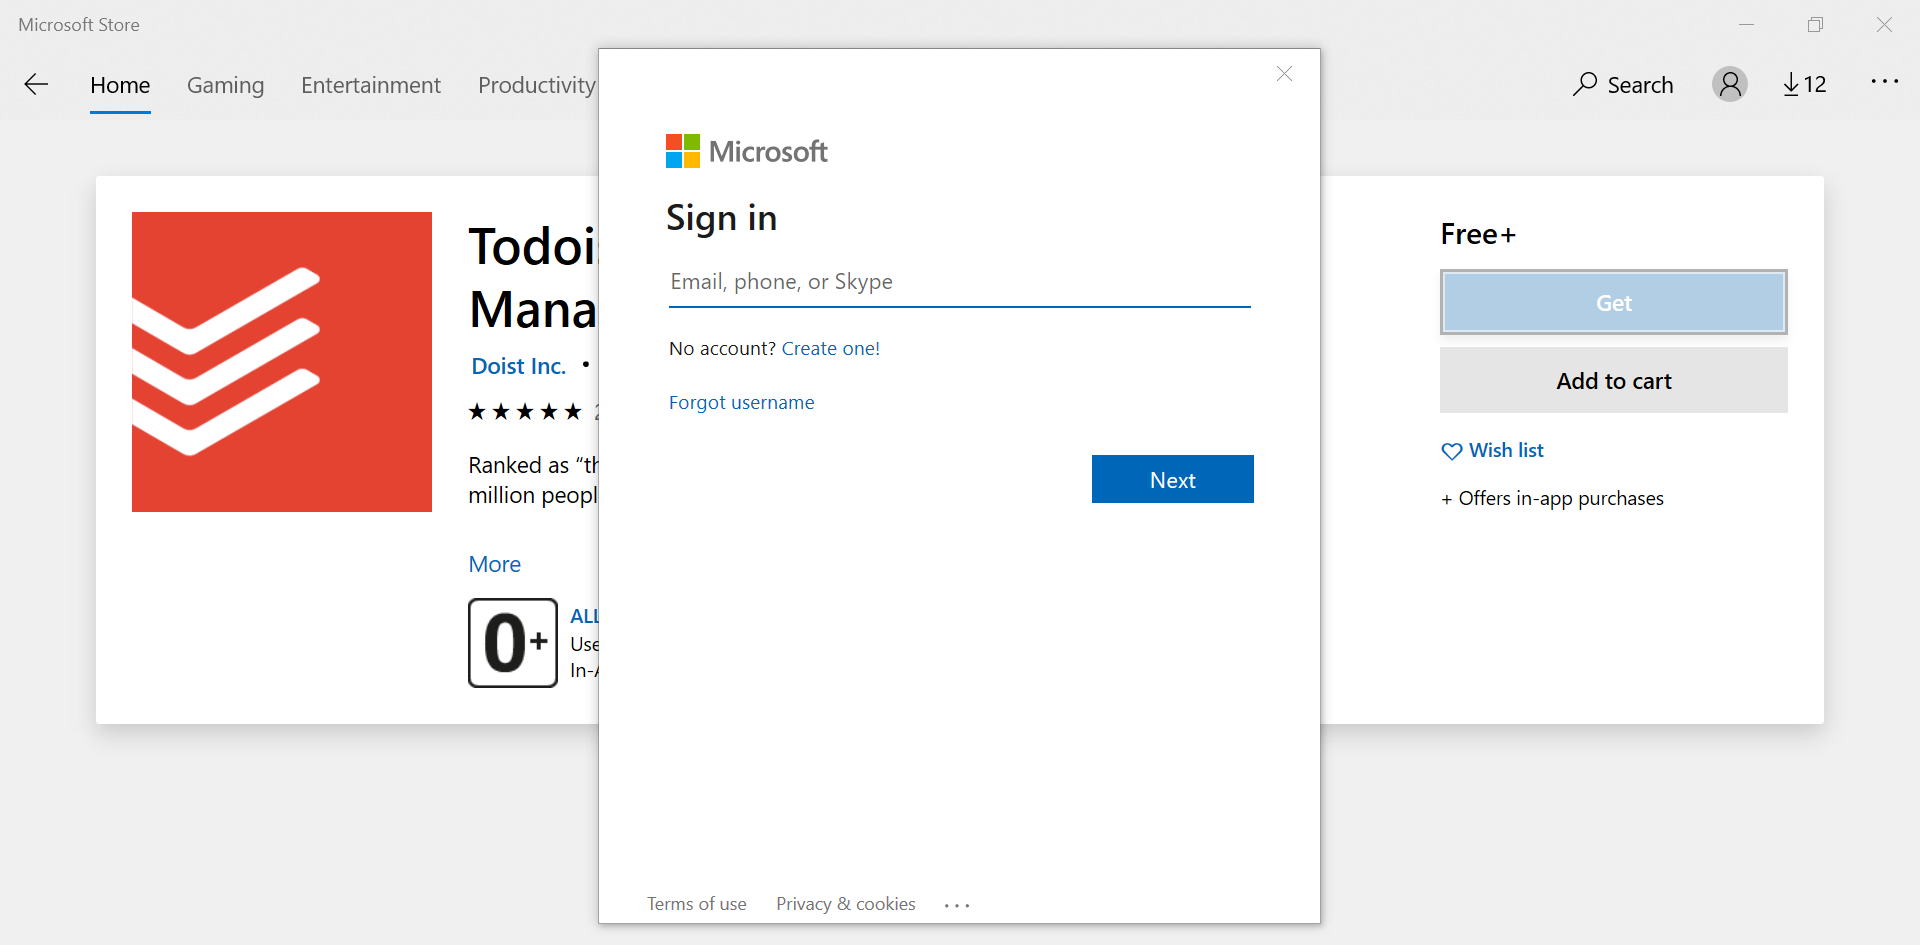 Sign in into windows store with corporate email 945accdf-8f21-4ae3-a1ae-28e2d23929d8?upload=true.png